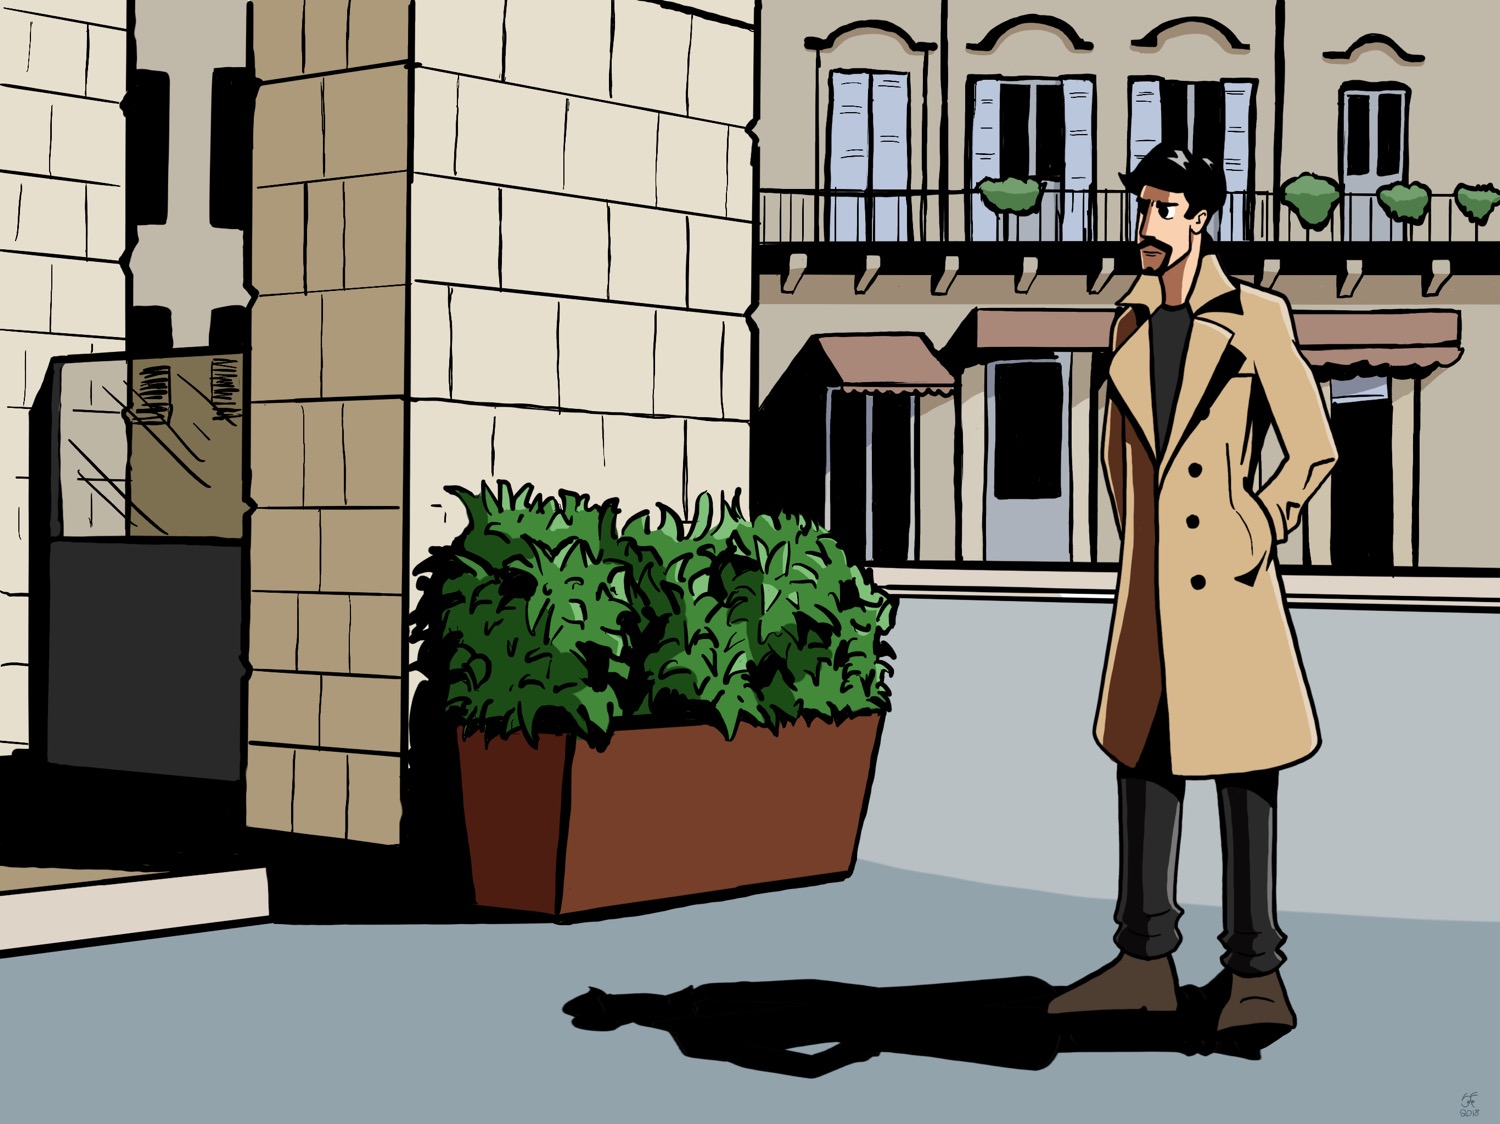 Illustration of a Lecce piazza with a dude in a trenchcoat standing on the right hand side